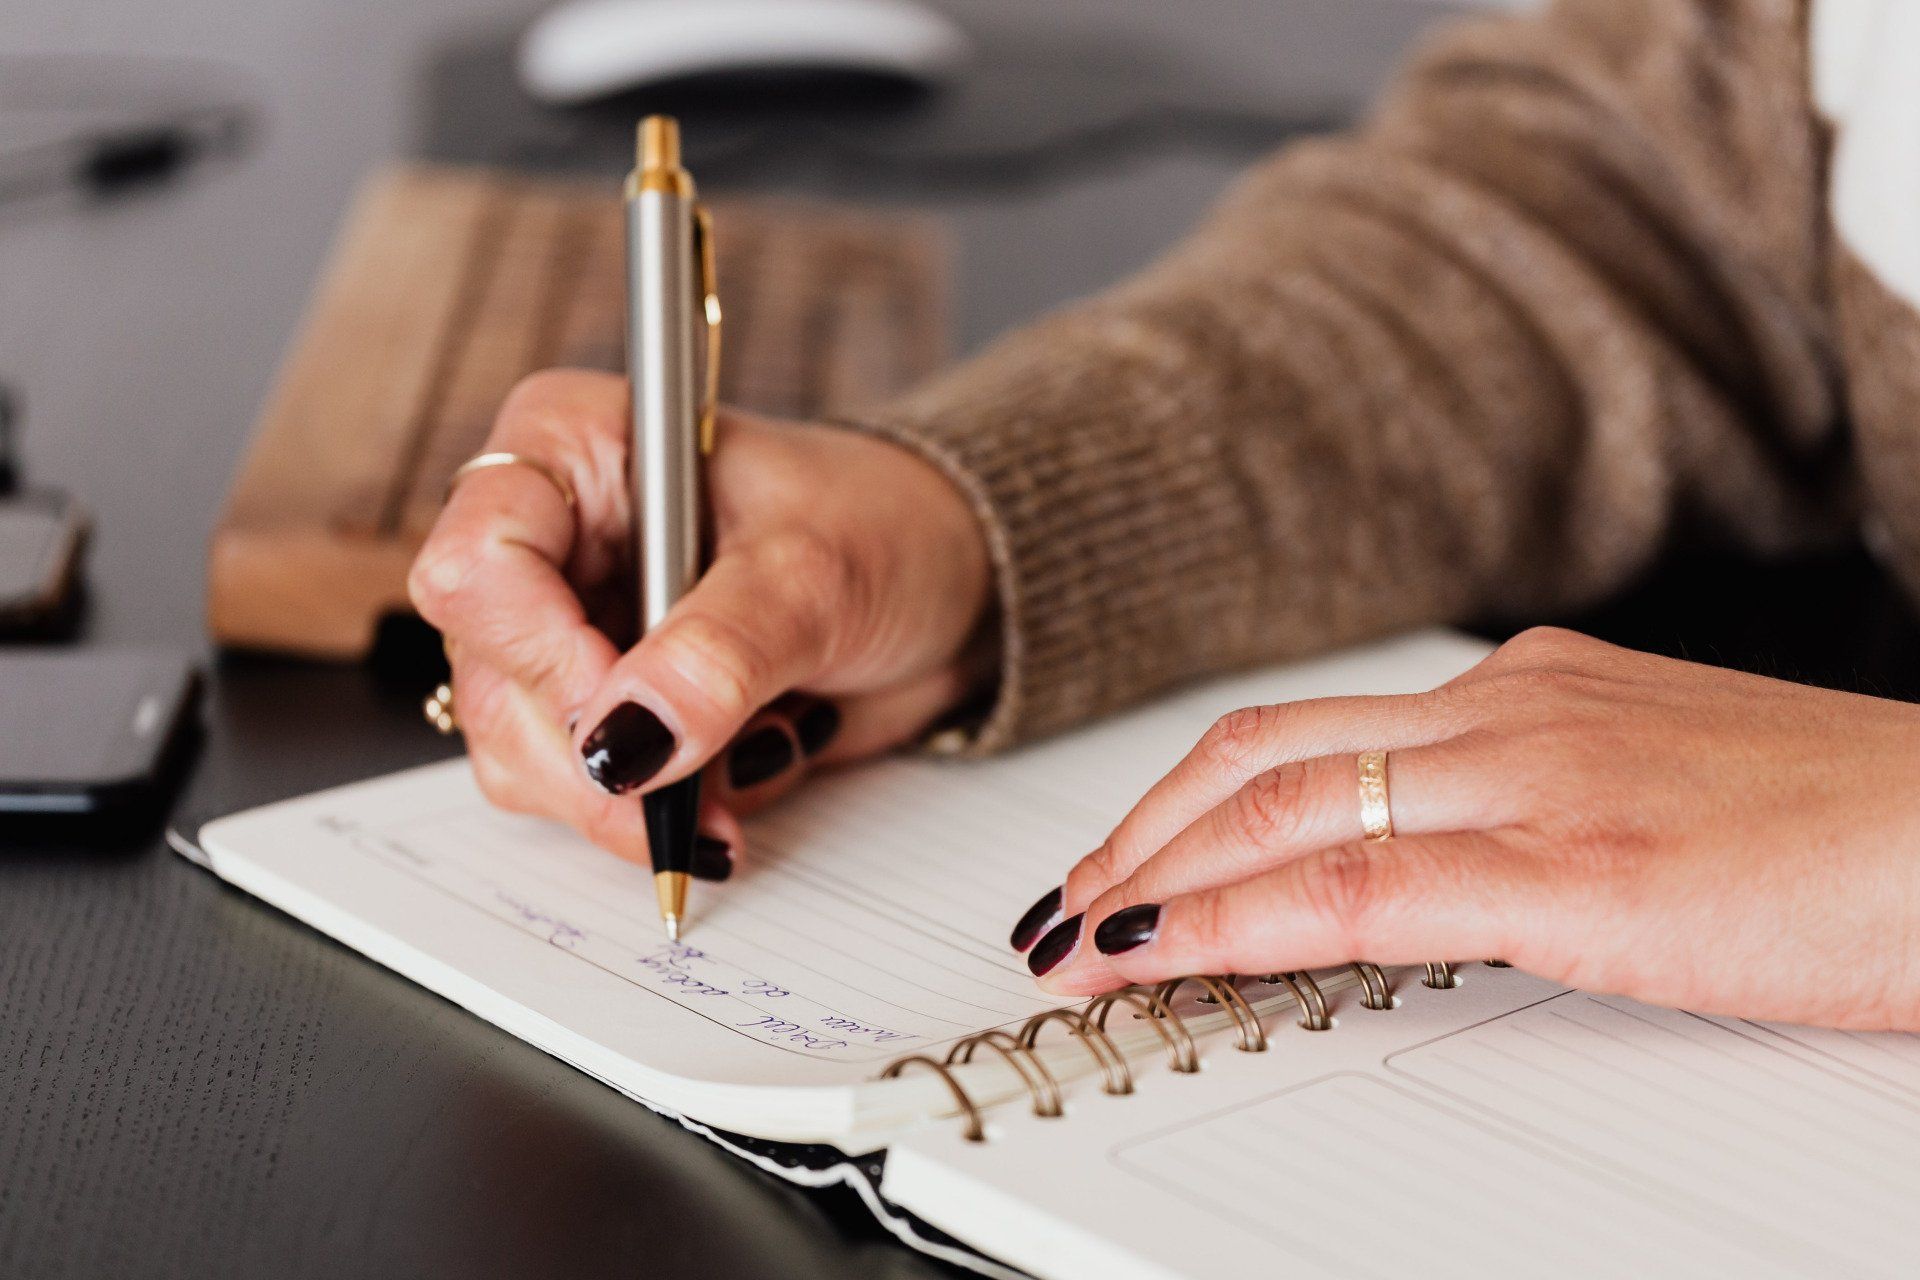 Close-up of woman's hands writing in a notebook